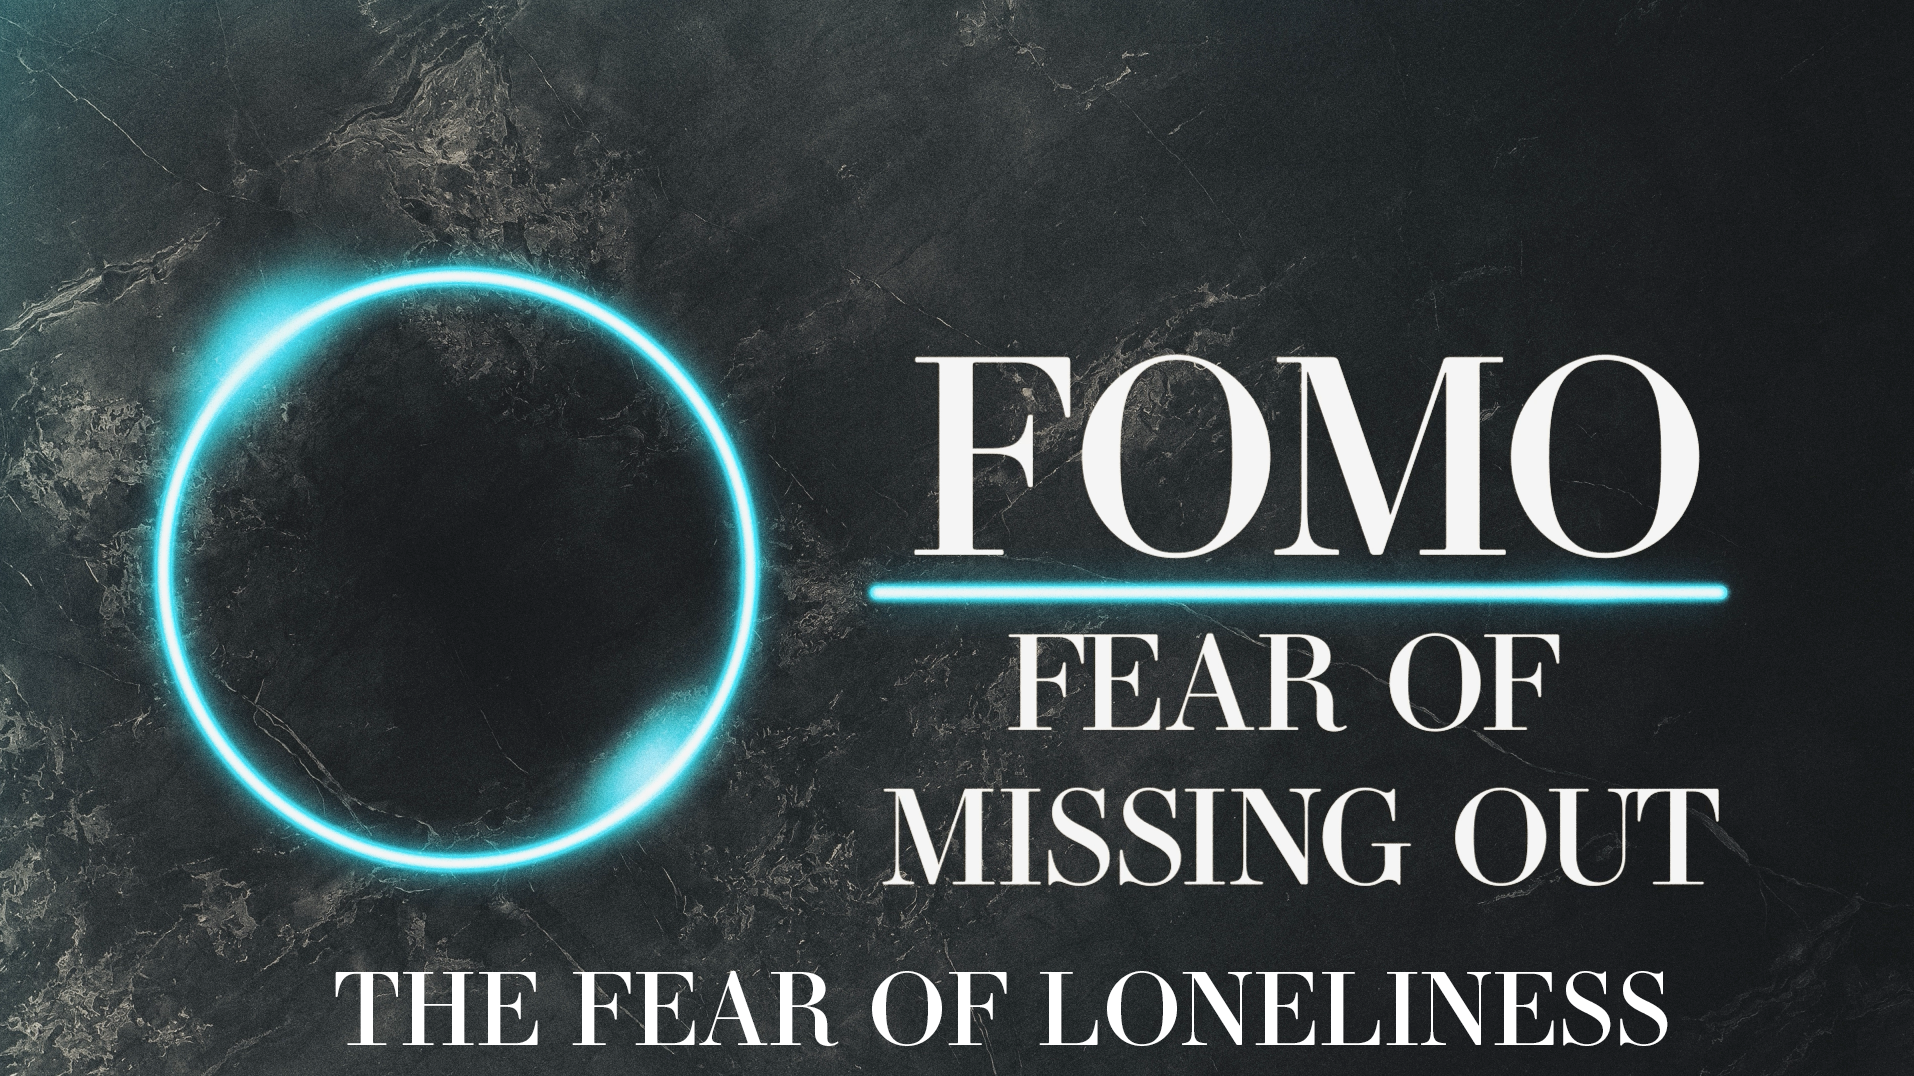 FOMO PART 2 "The Fear of Loneliness" (THRIVE Service)